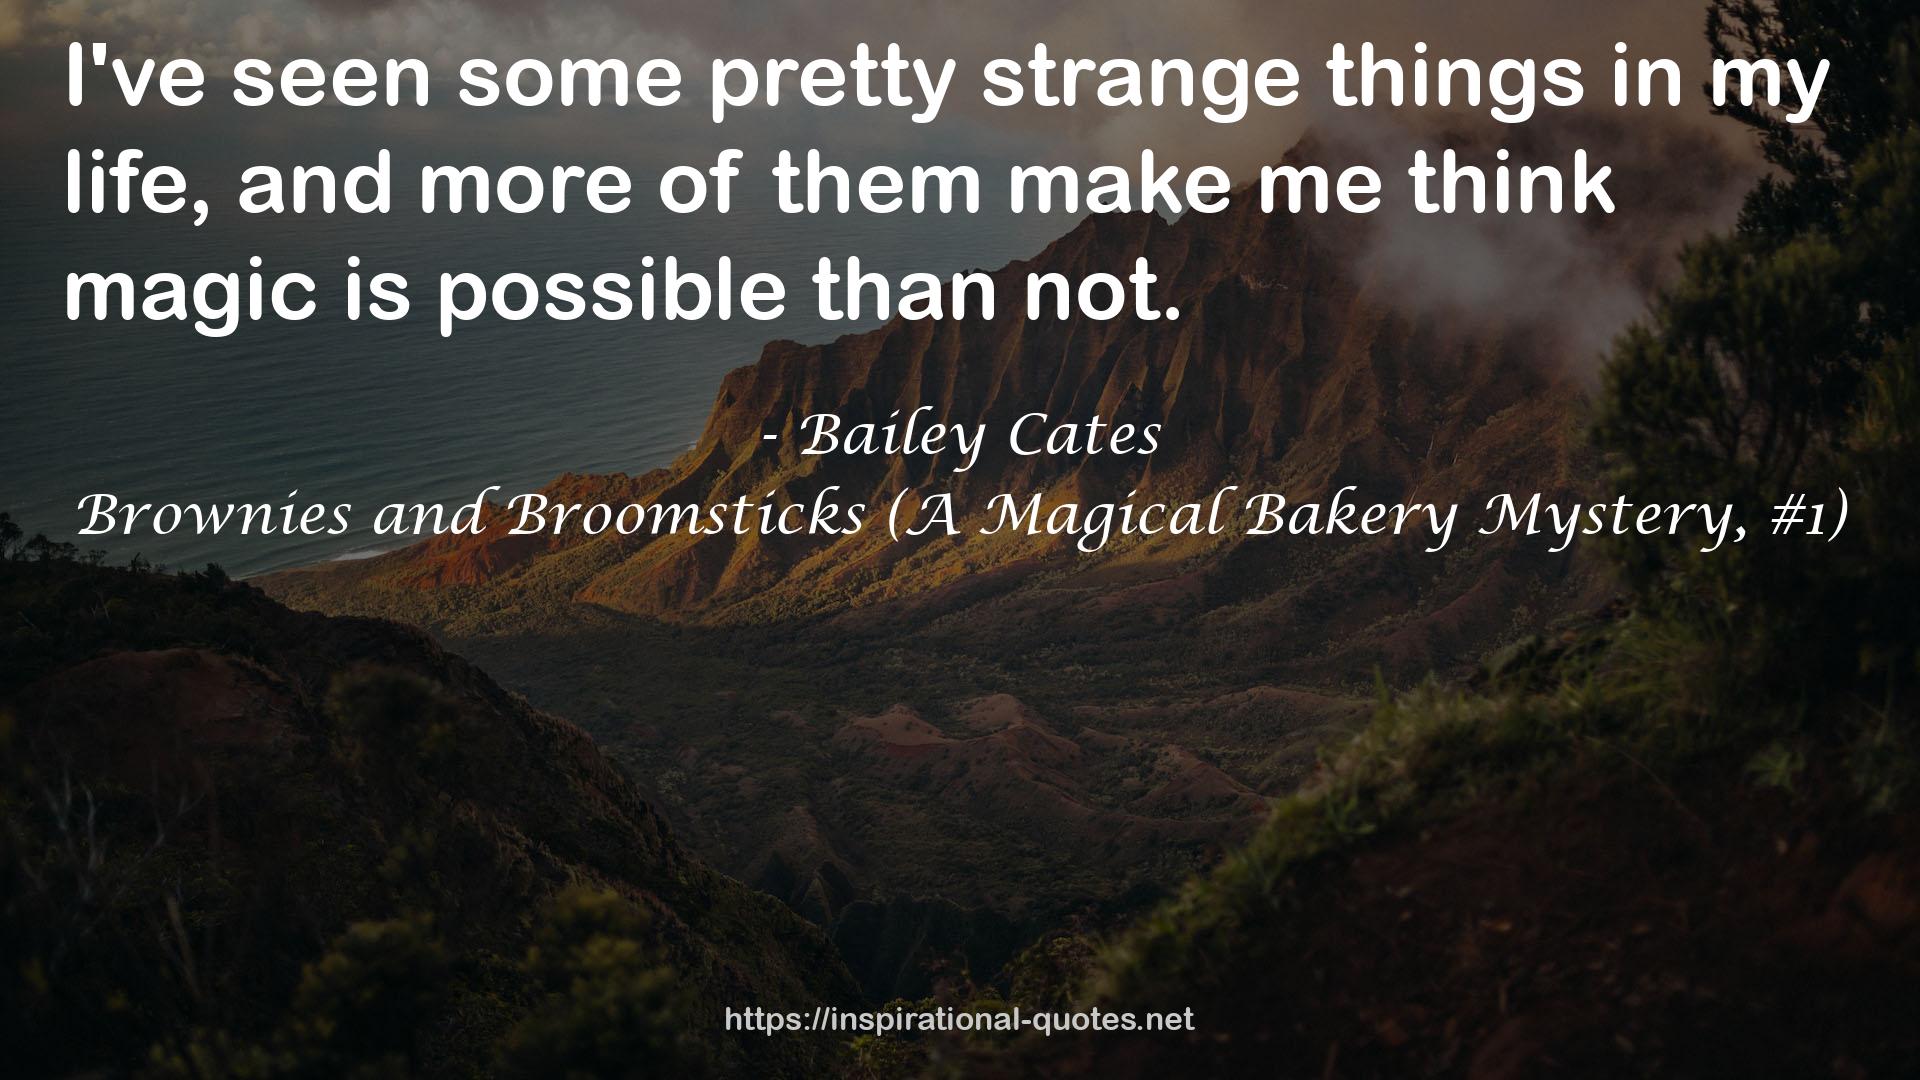 Bailey Cates QUOTES